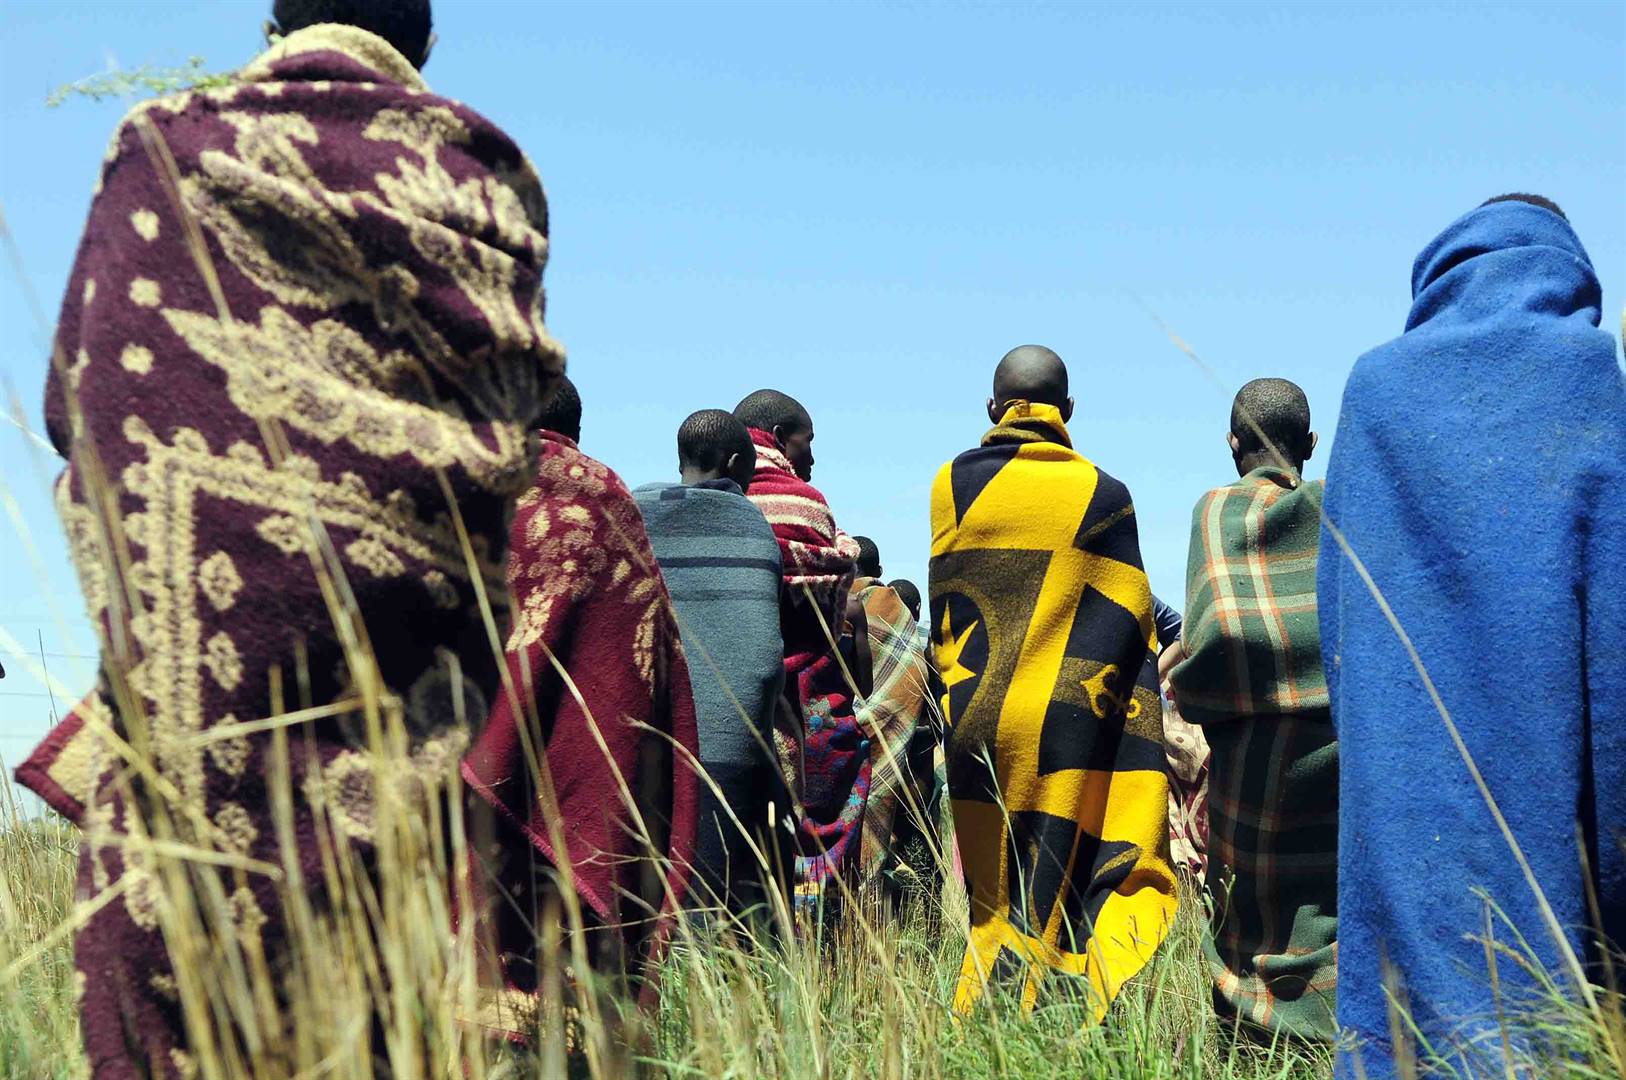 An estimated 1 500 initiates completed the rites of passage at initiation schools in the Western Cape.